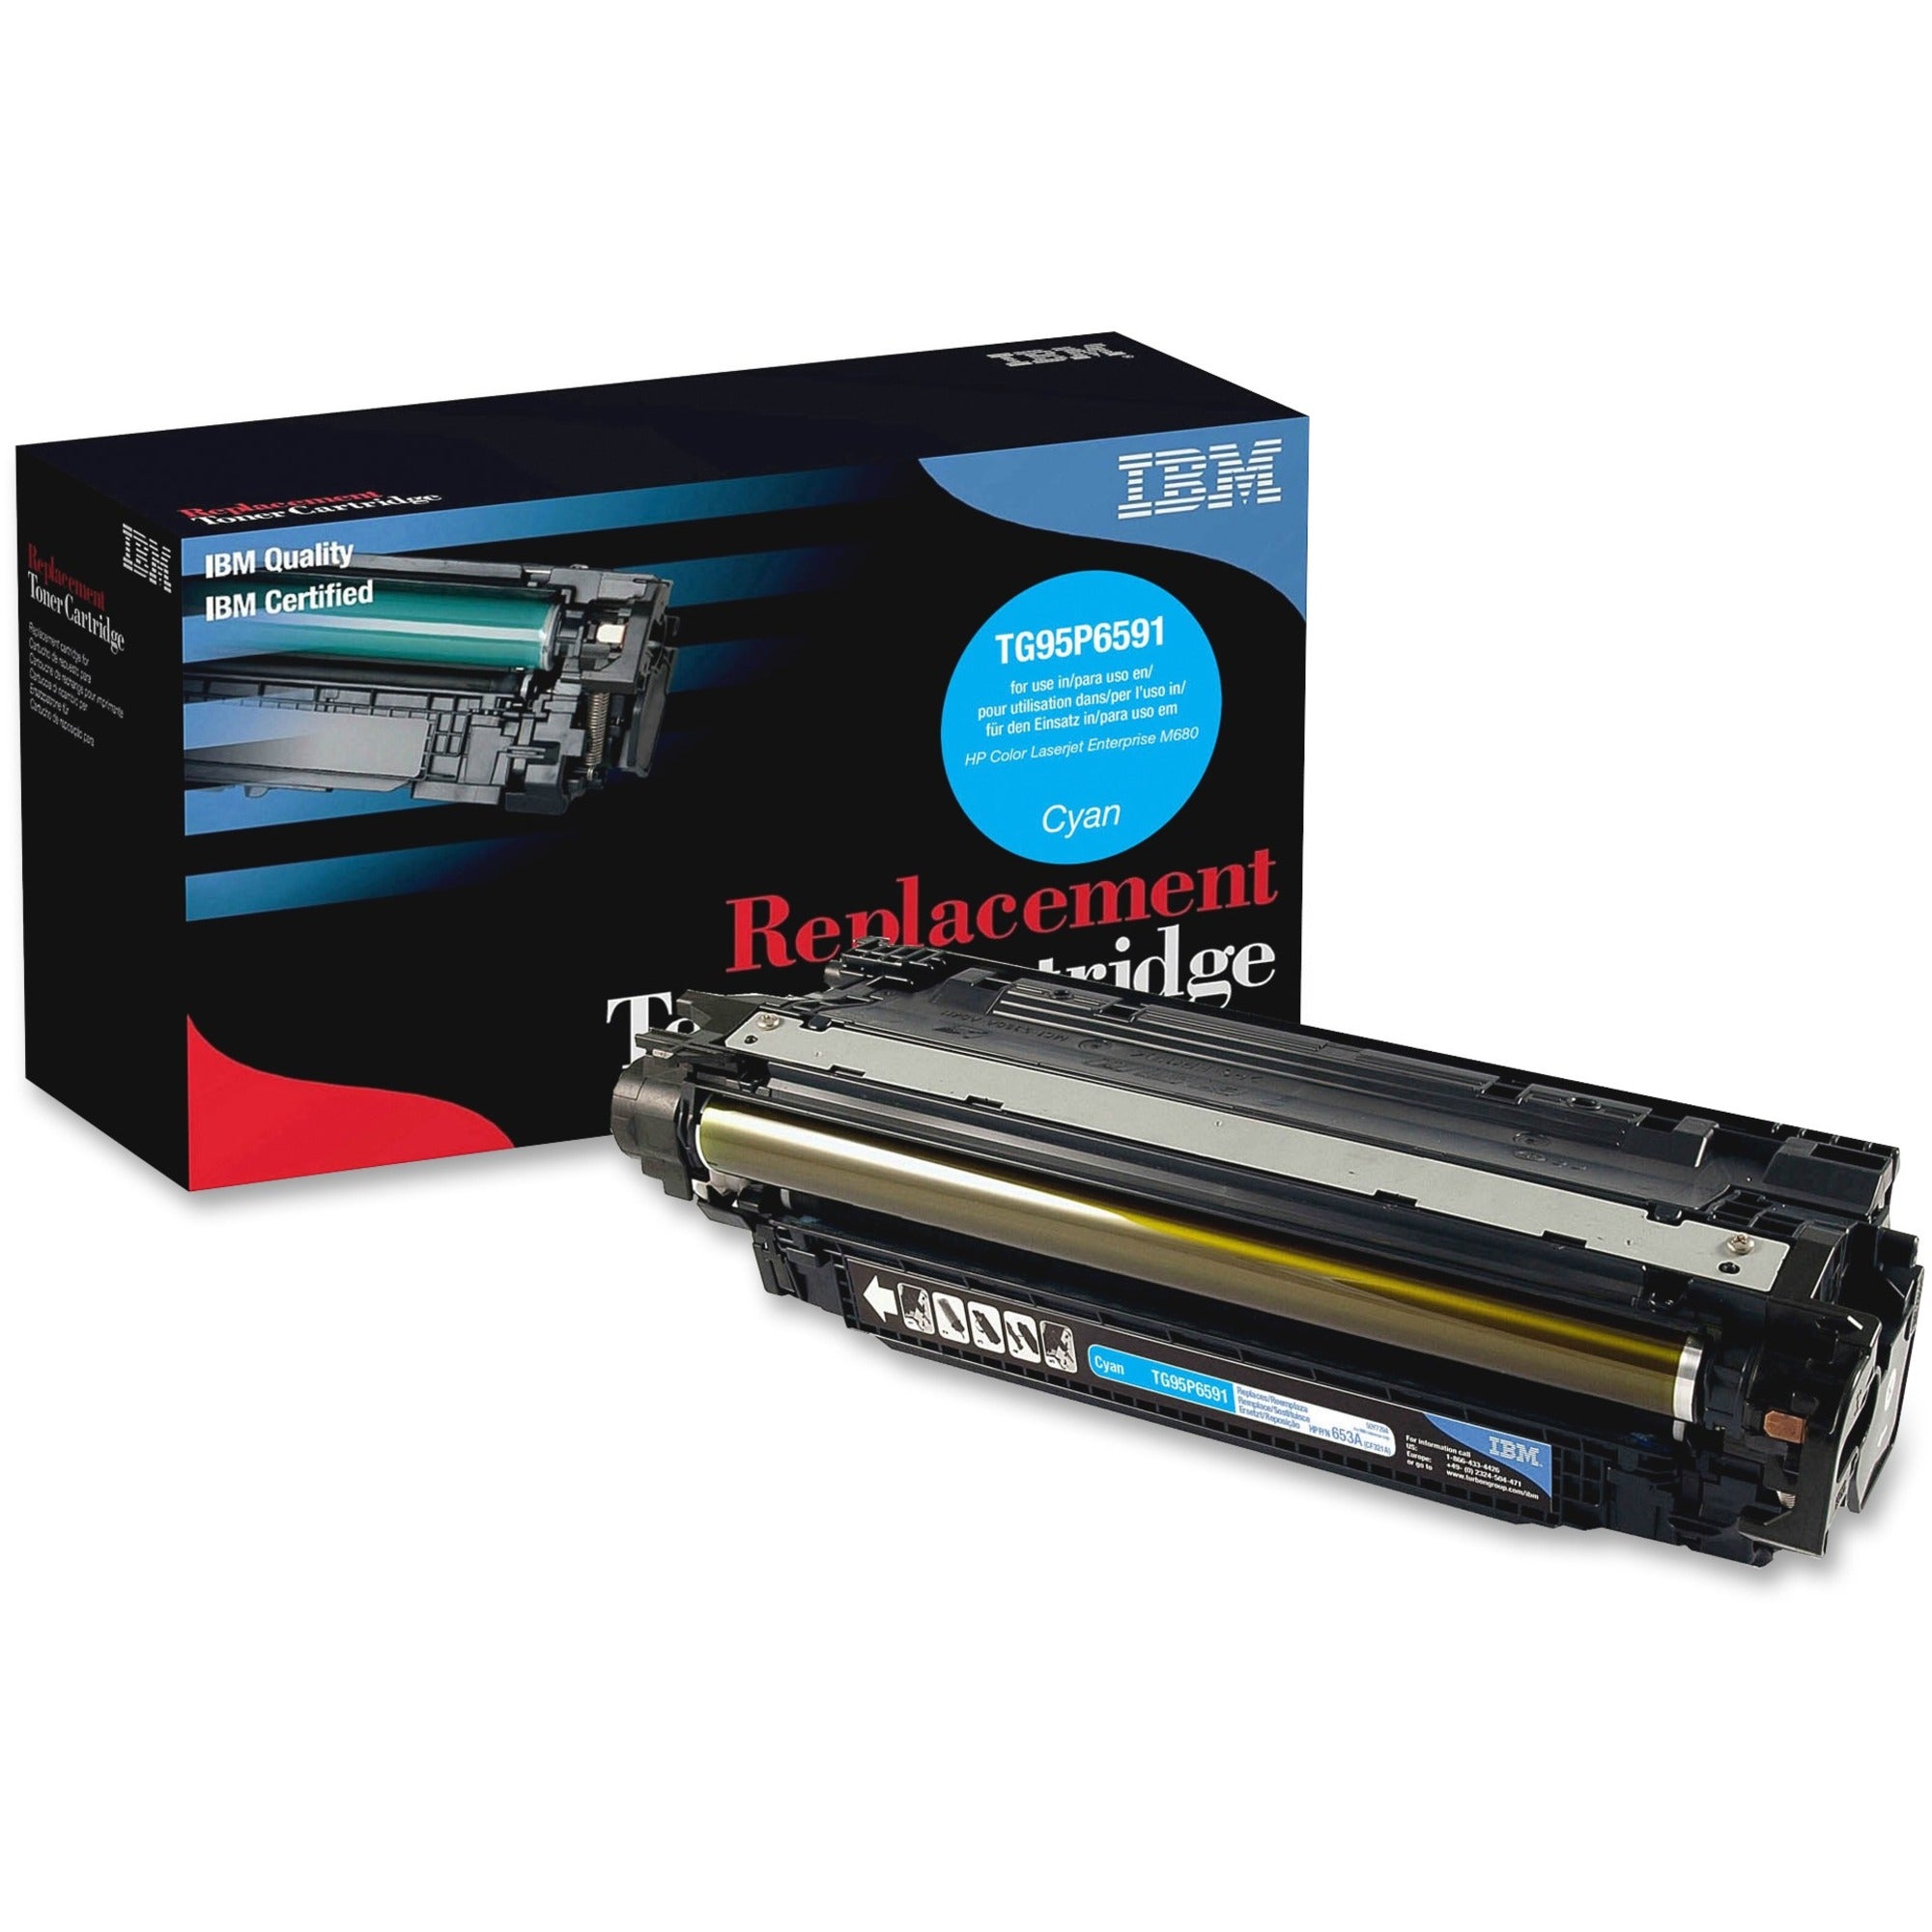 IBM Remanufactured Laser Toner Cartridge - Alternative for HP 653A (CF321A) - Cyan - 1 Each - 16500 Pages - 